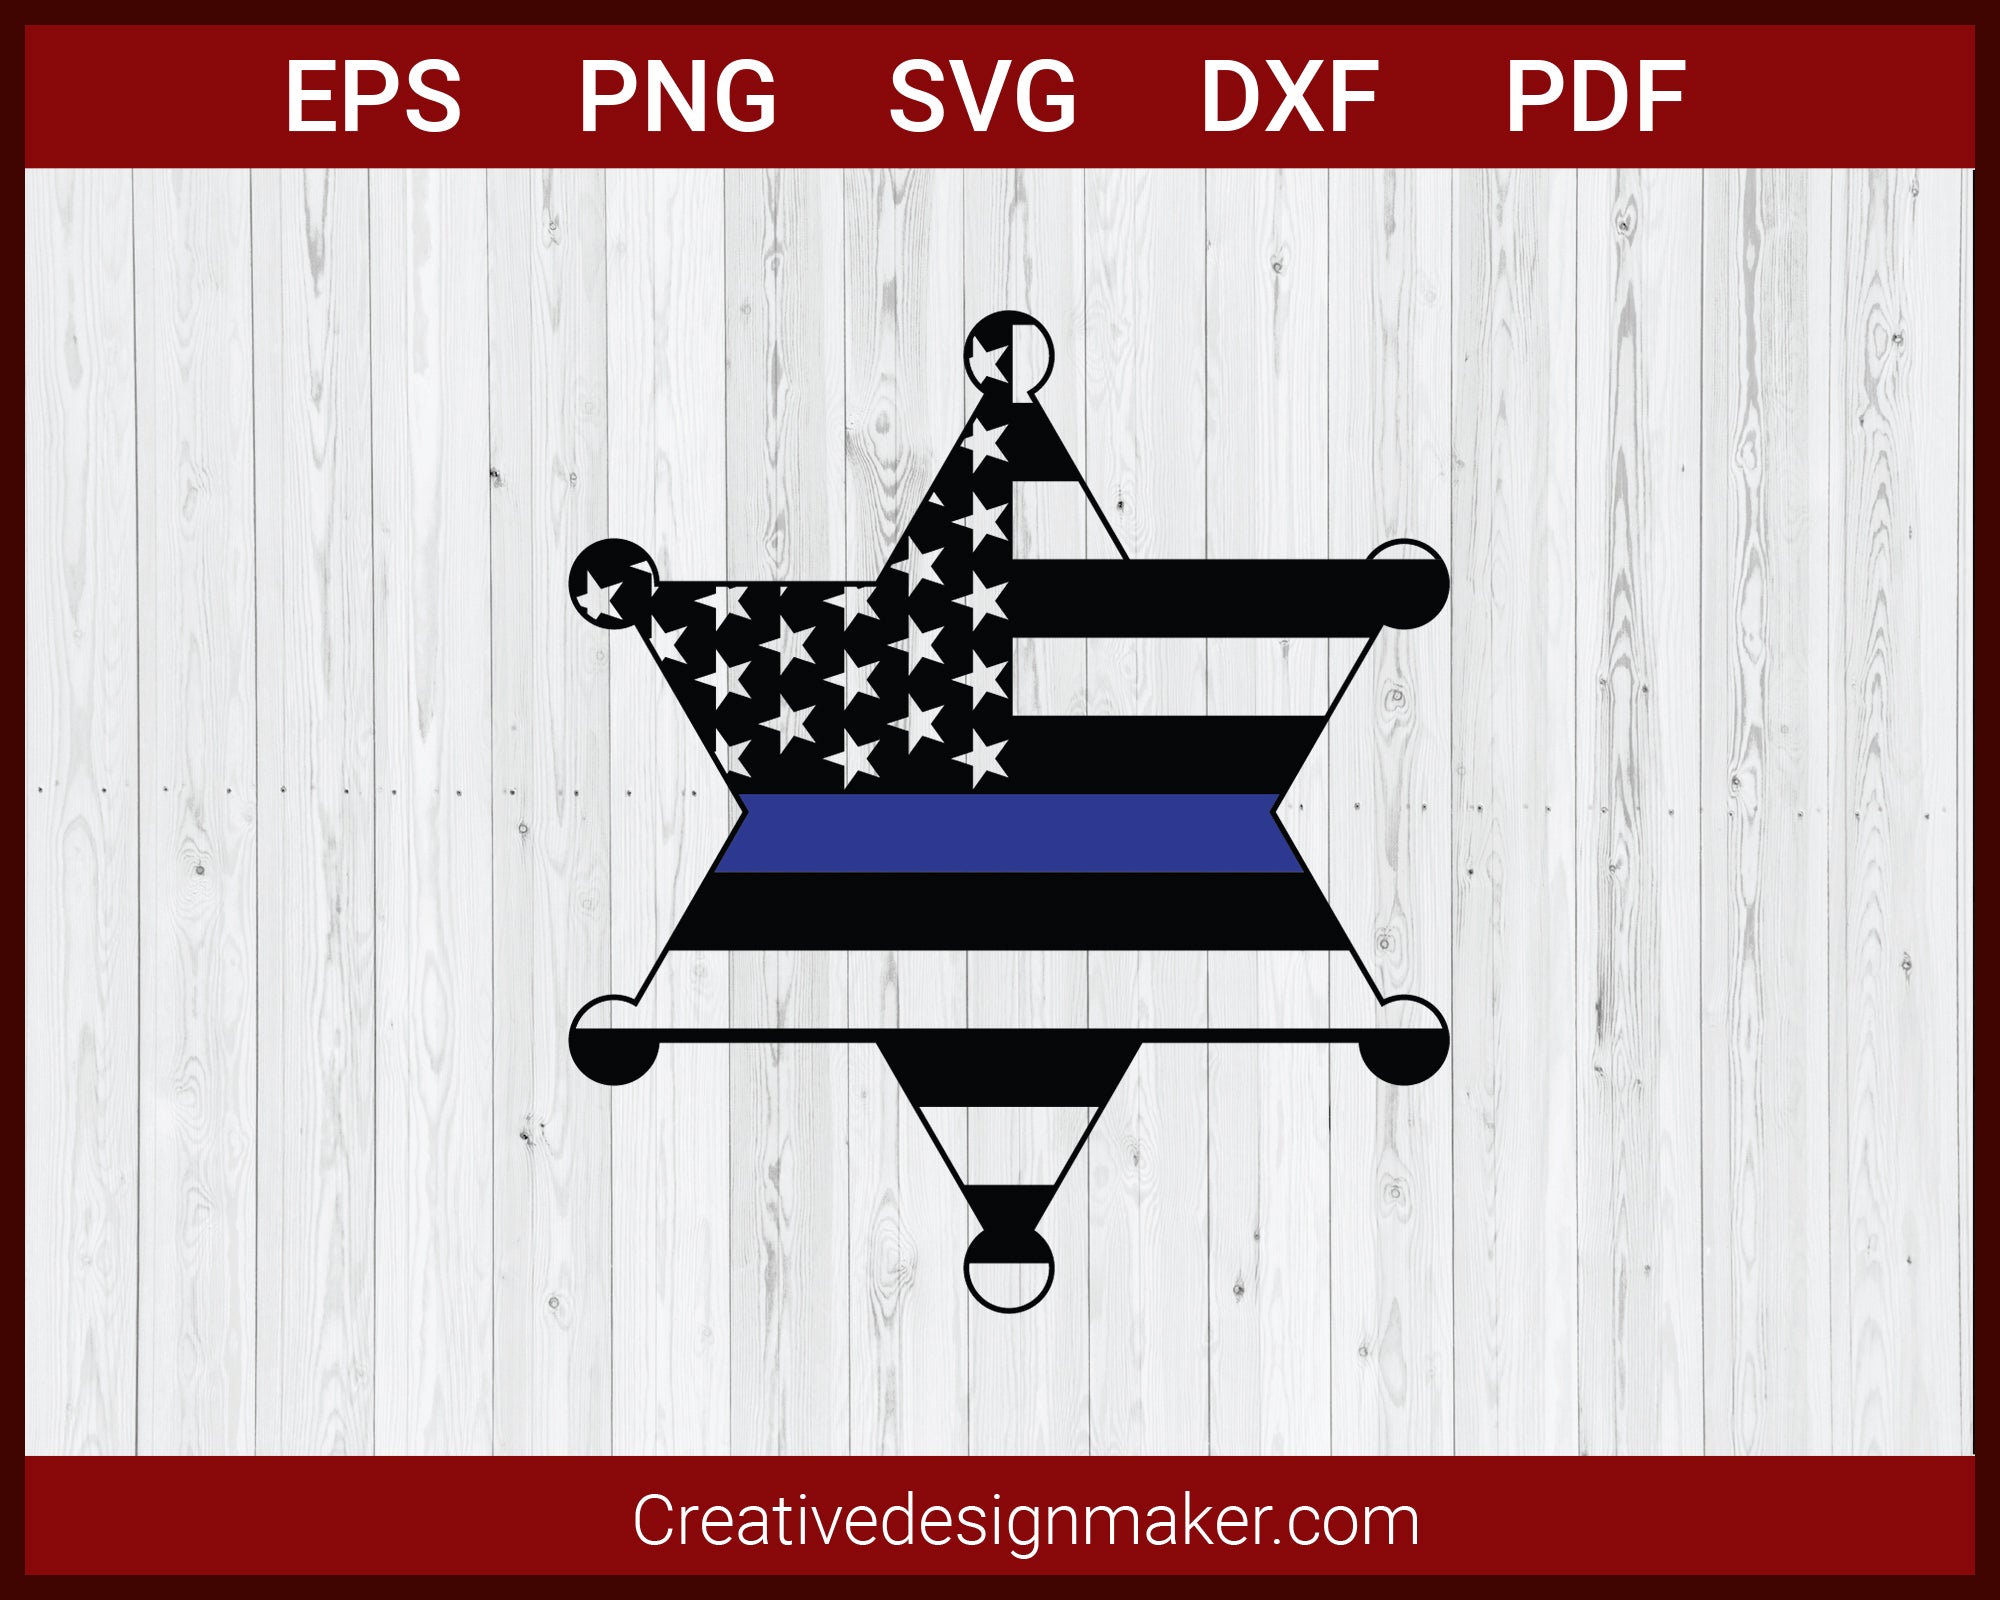 Thin Blue Line Star Badge American Flag Police SVG Cricut Silhouette DXF PNG EPS Cut File